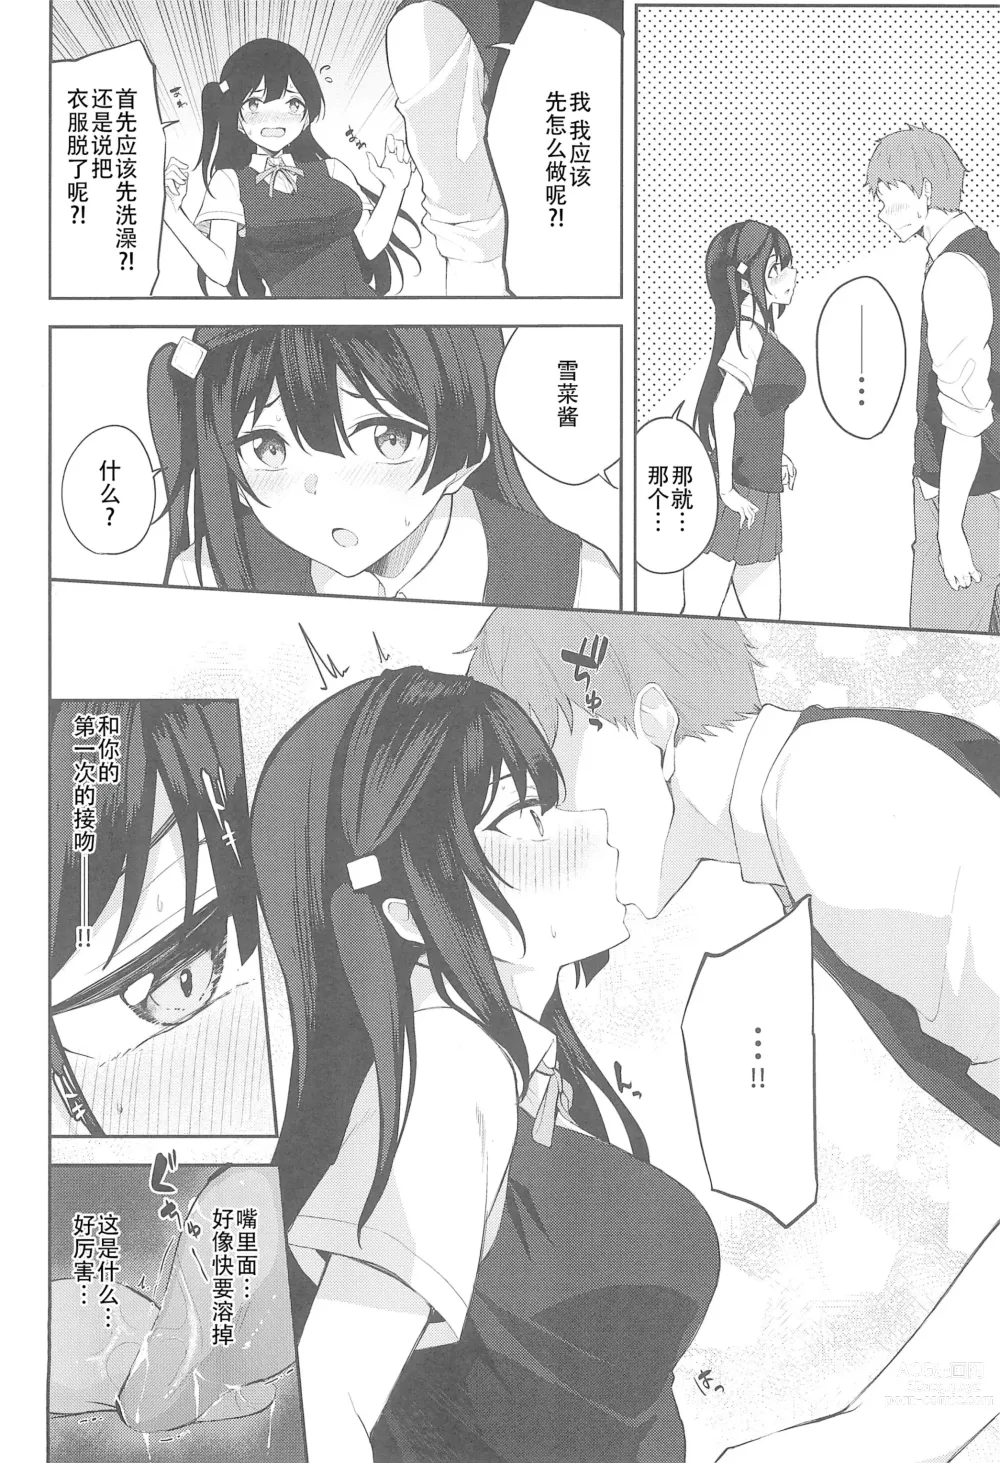 Page 7 of doujinshi Sunny Scarlet